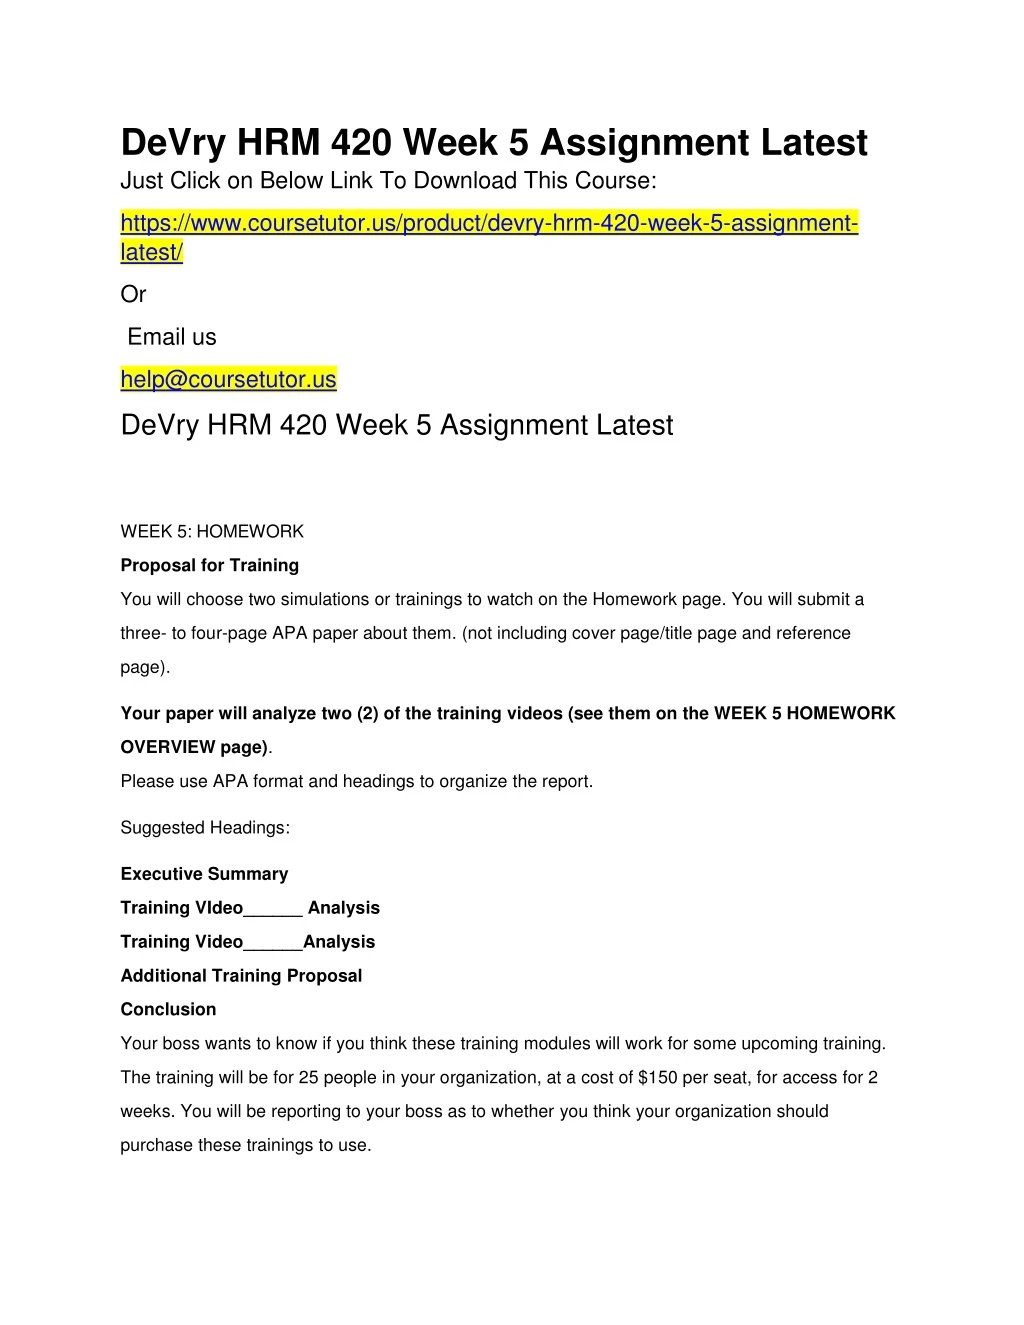 devry hrm 420 week 5 assignment latest just click